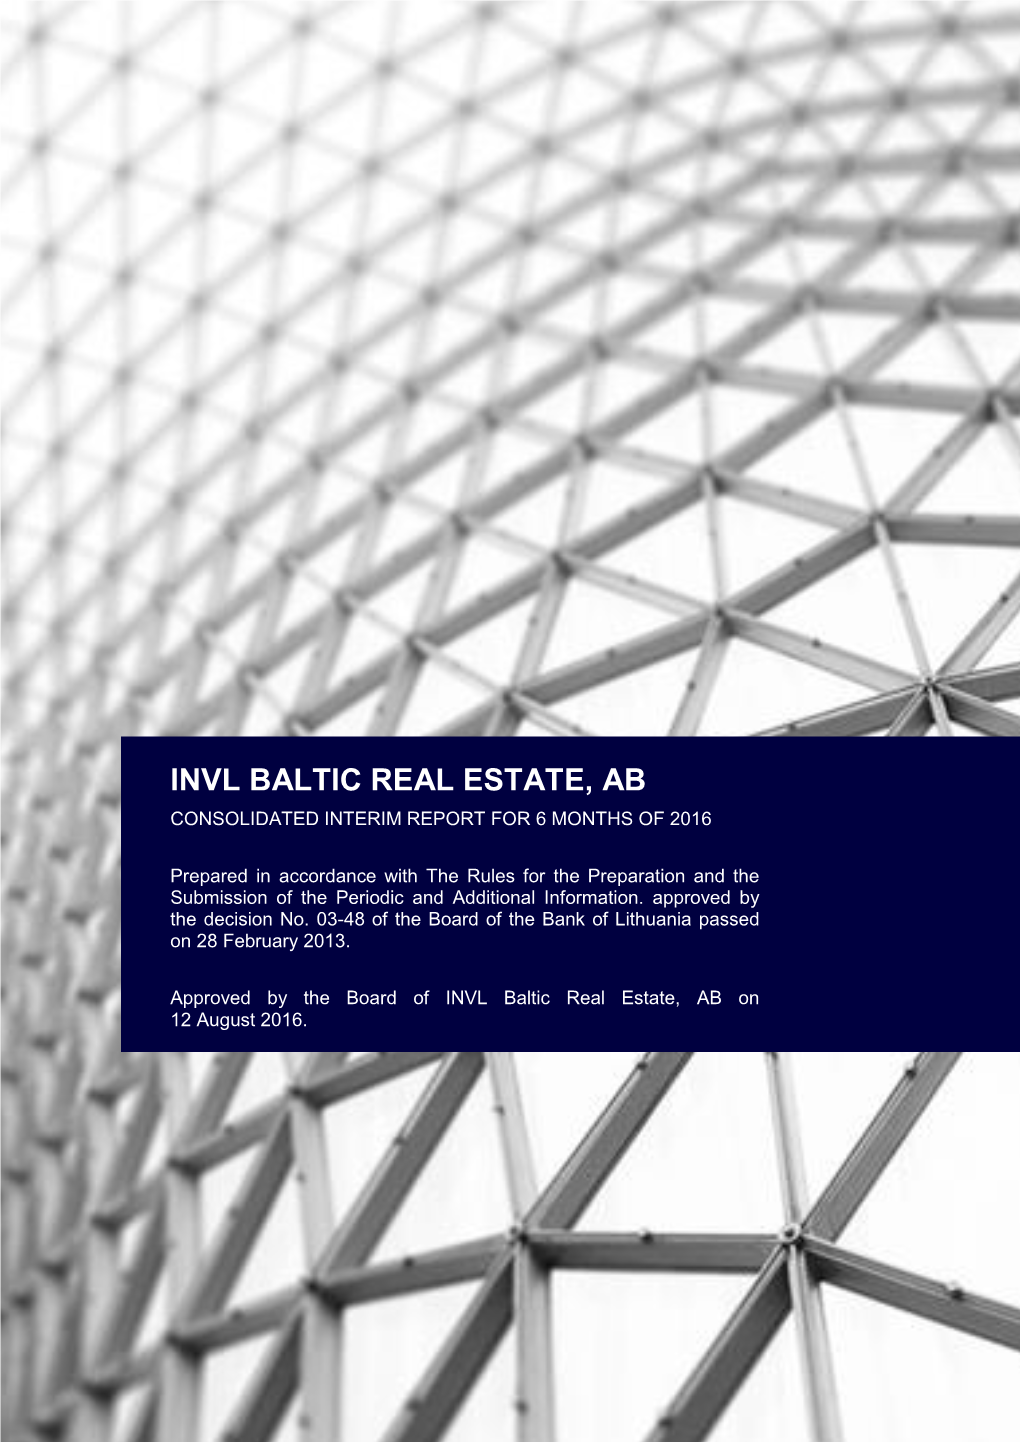 Invl Baltic Real Estate, Ab Consolidated Interim Report for 6 Months of 2016